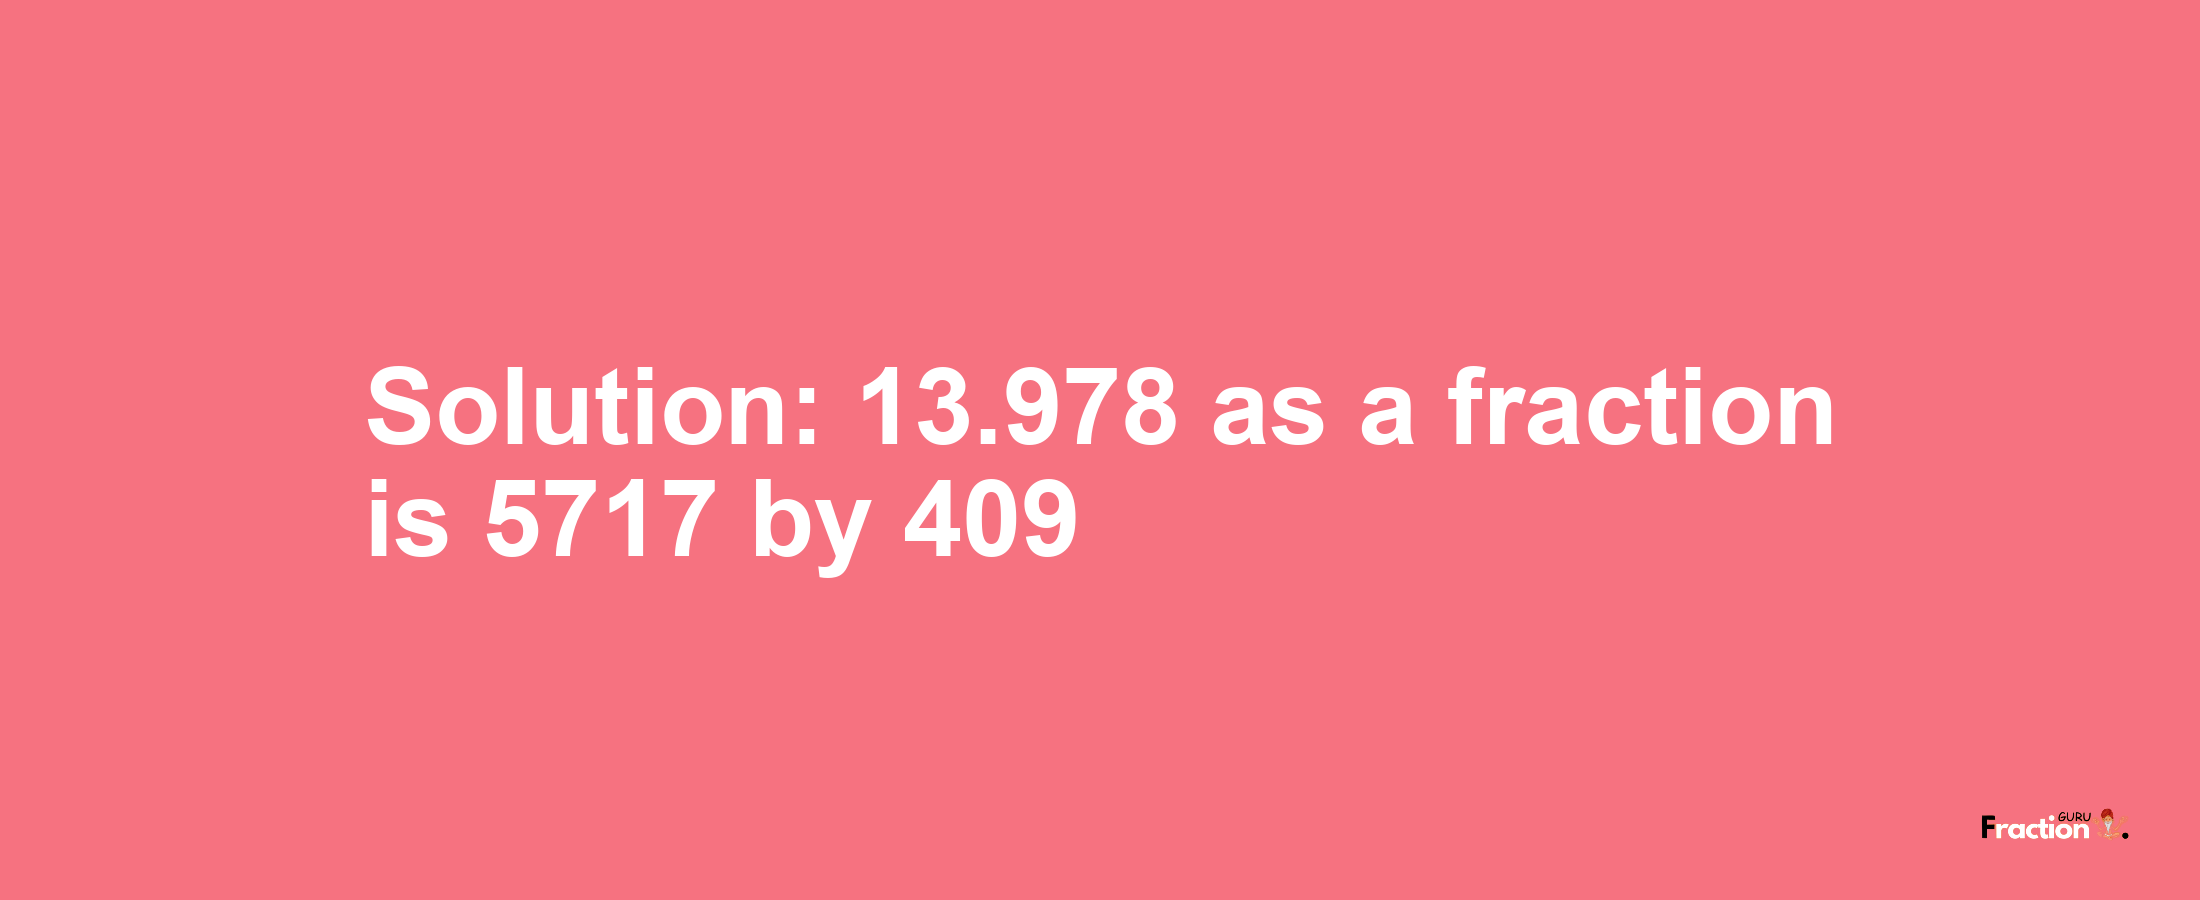 Solution:13.978 as a fraction is 5717/409